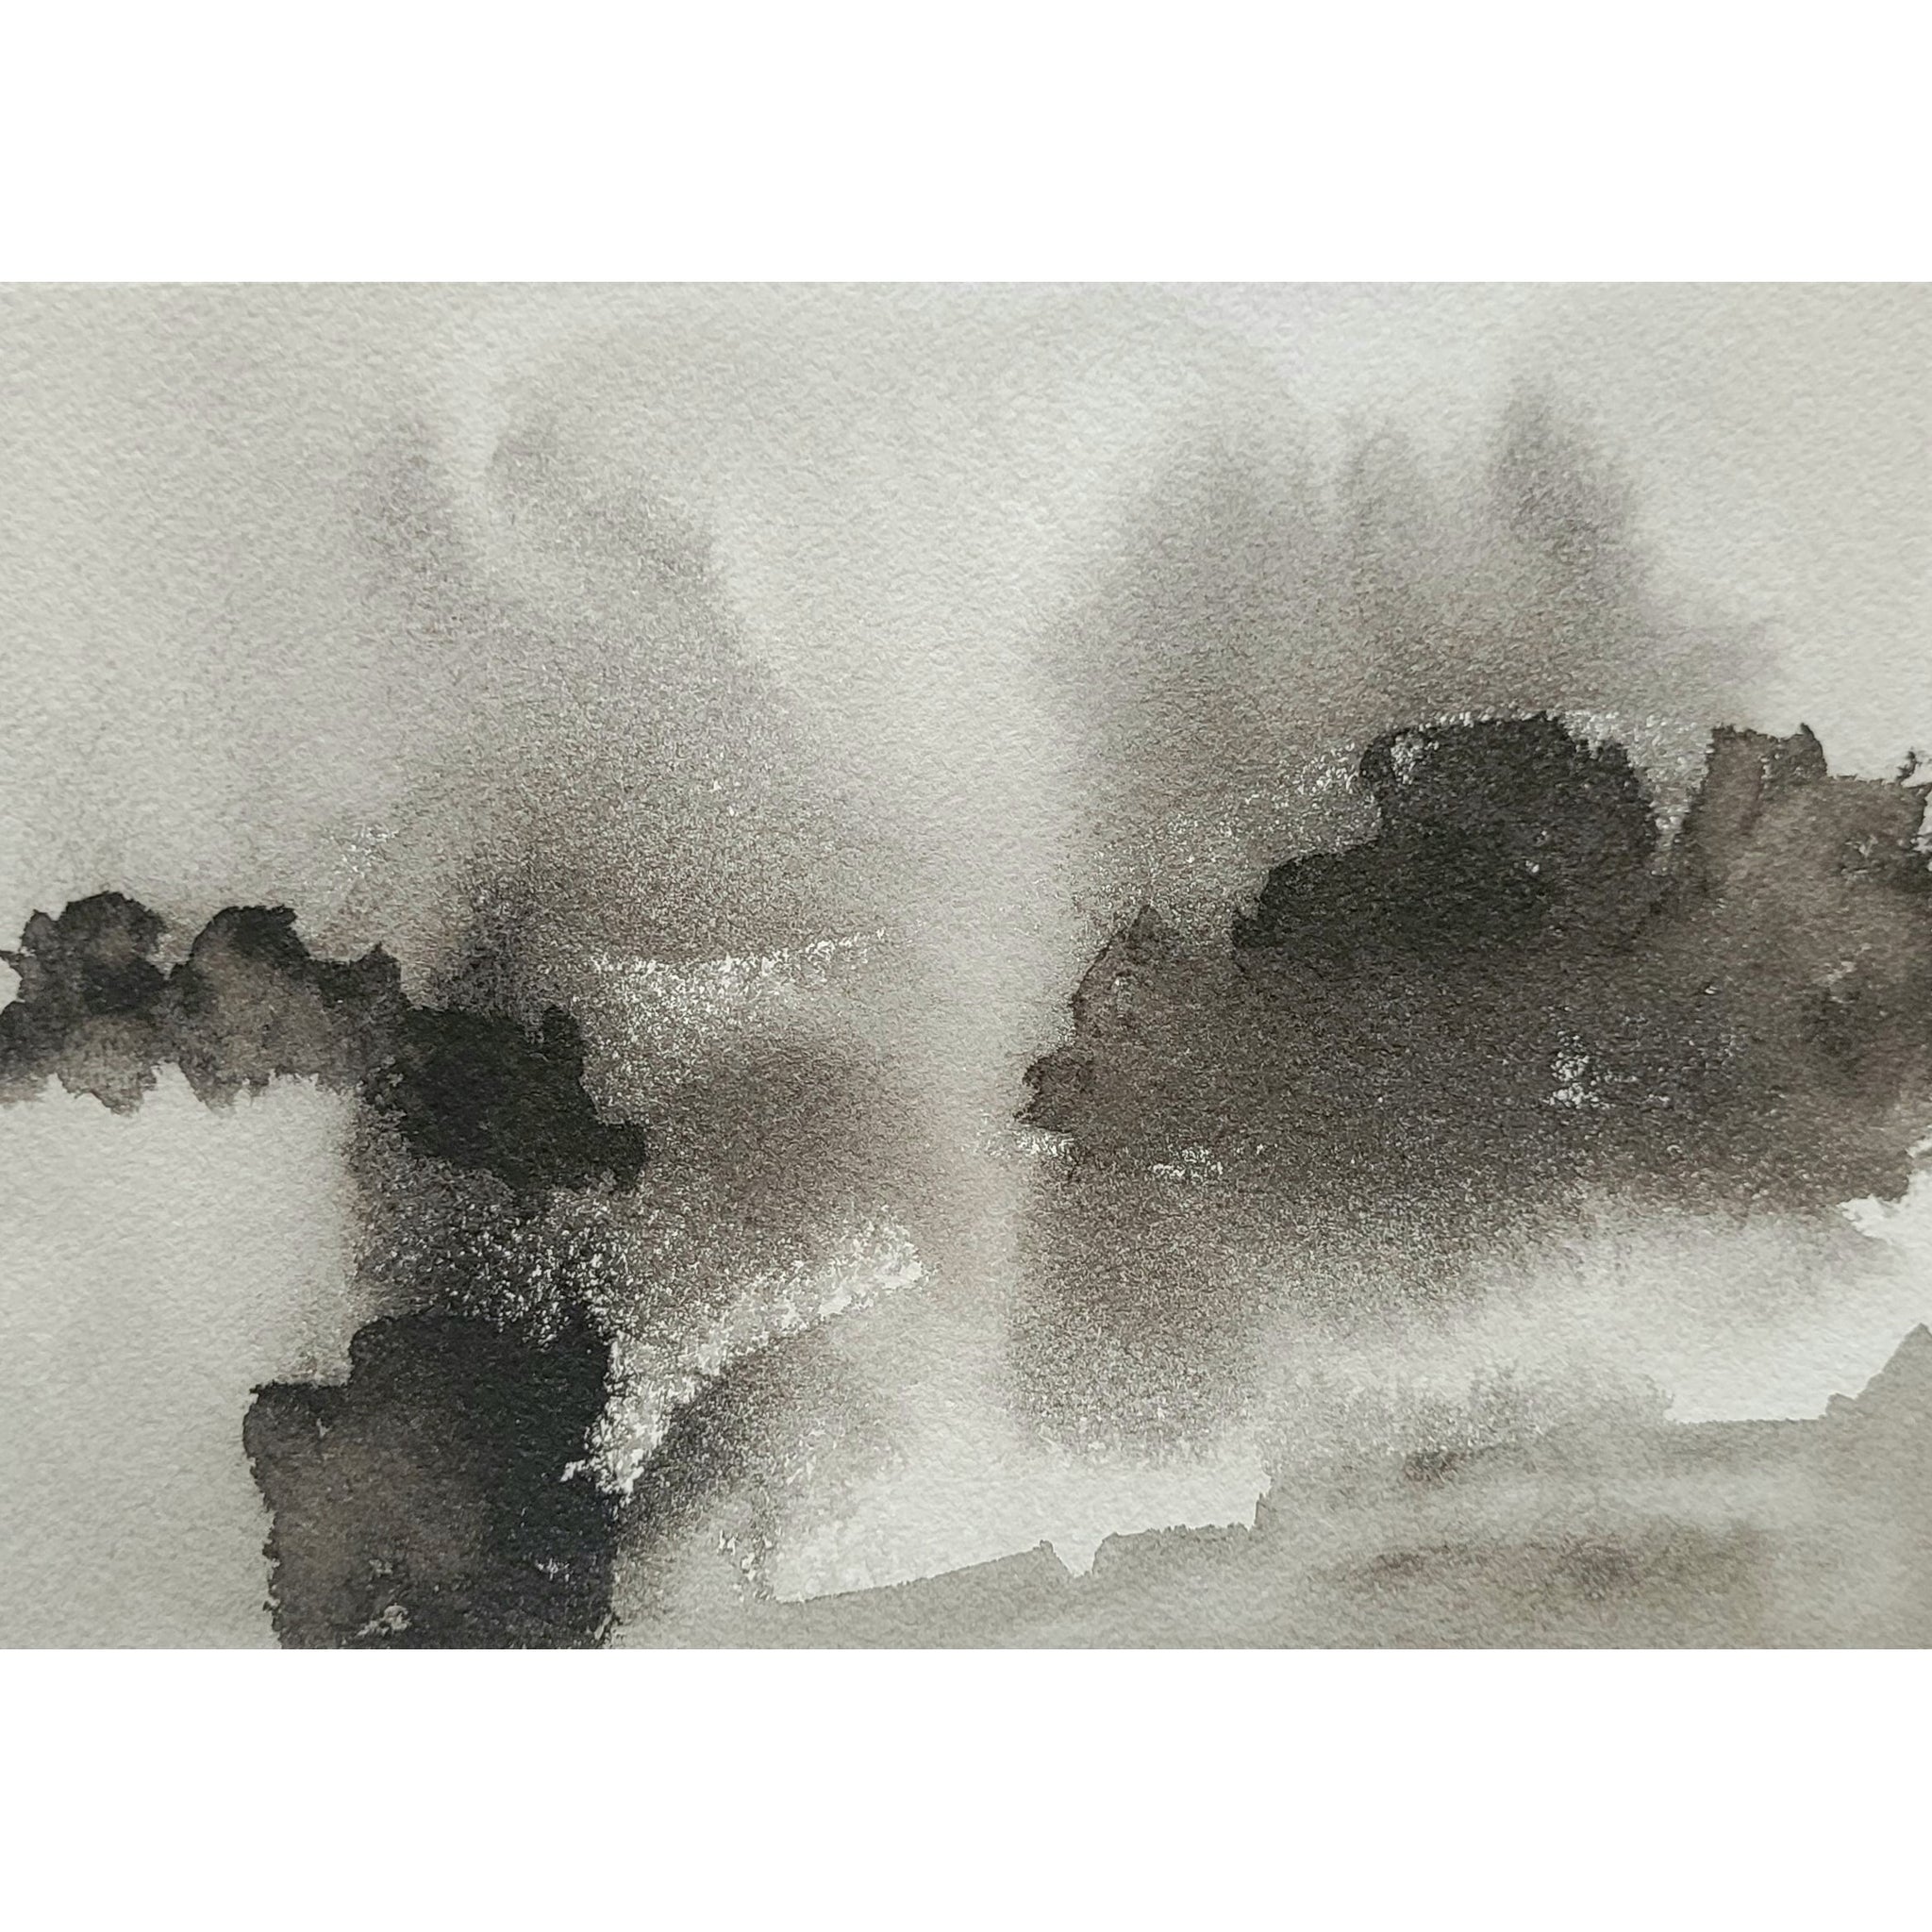 Black & White Abstract Landscape Painting Original Watercolor Art 5 x 7 inch - Dusk I